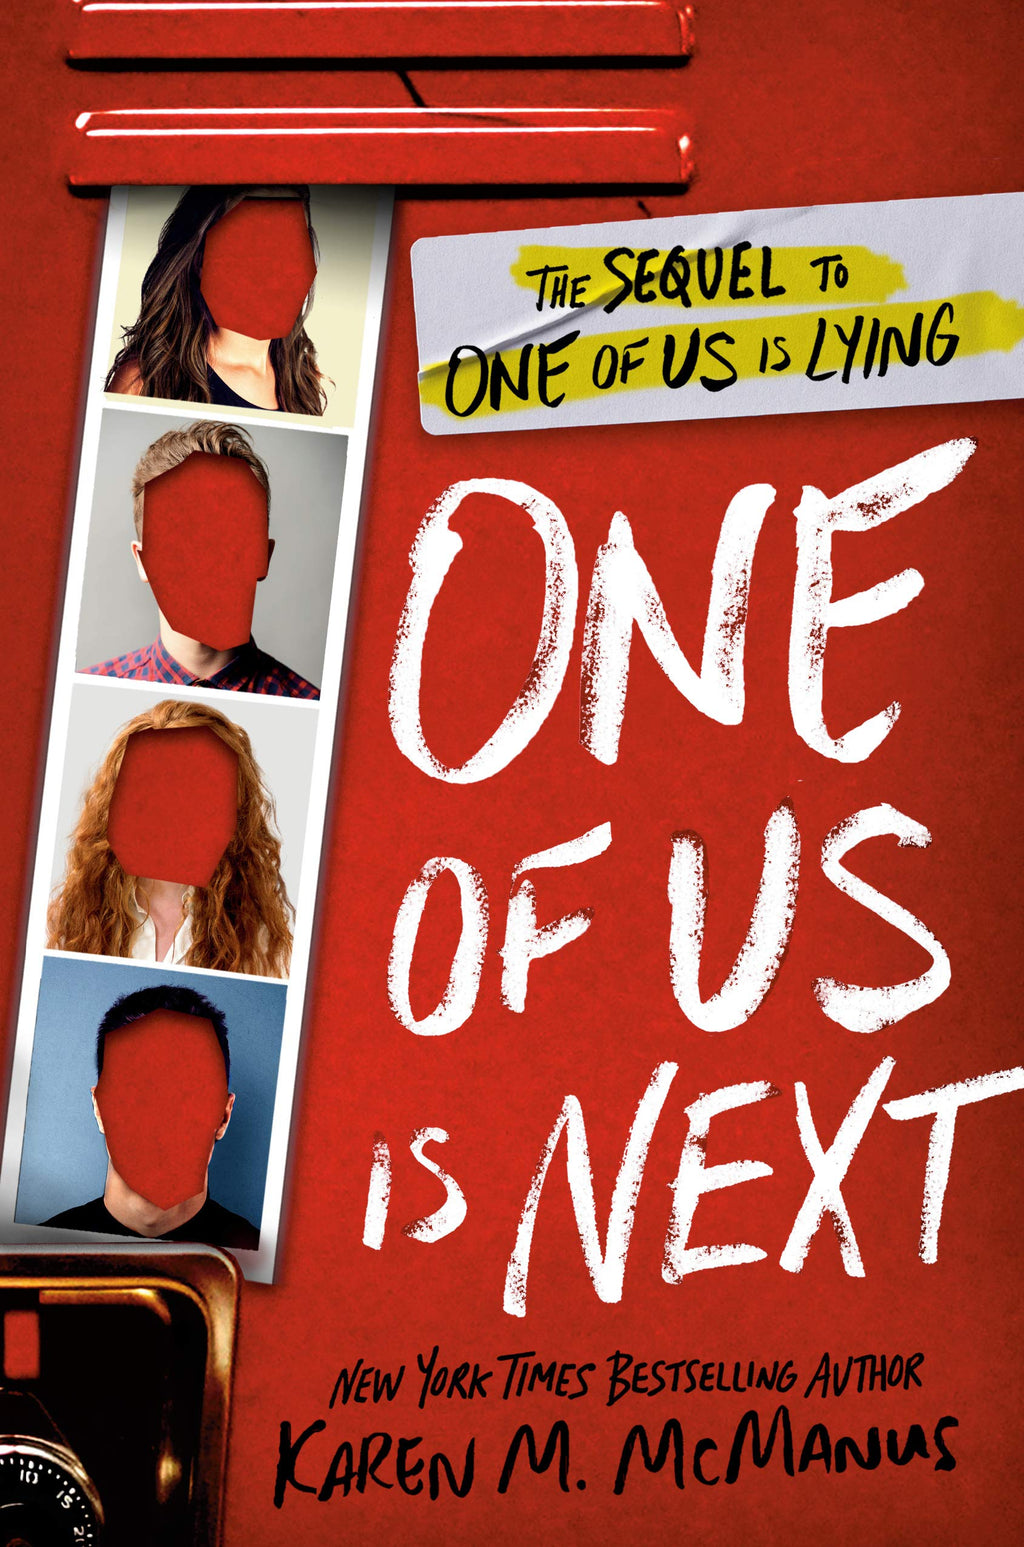 book after one of us is next